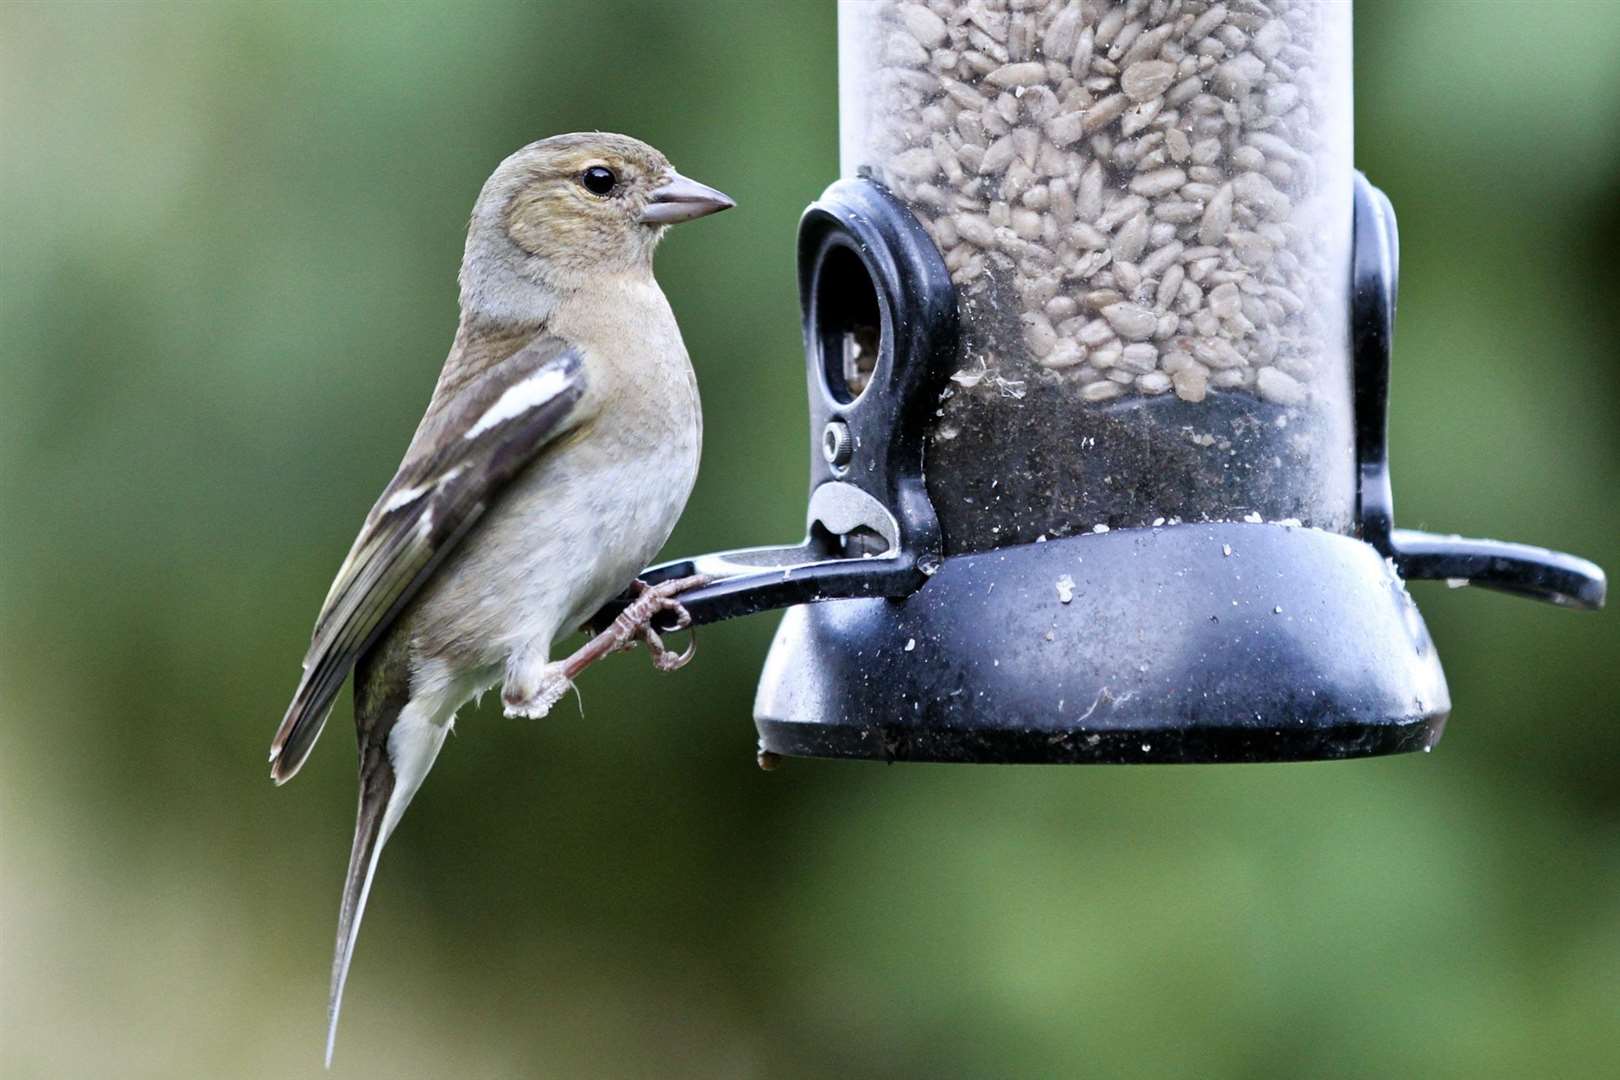 Feeders should be cleaned weekly and water bowls daily, says the RSPCA